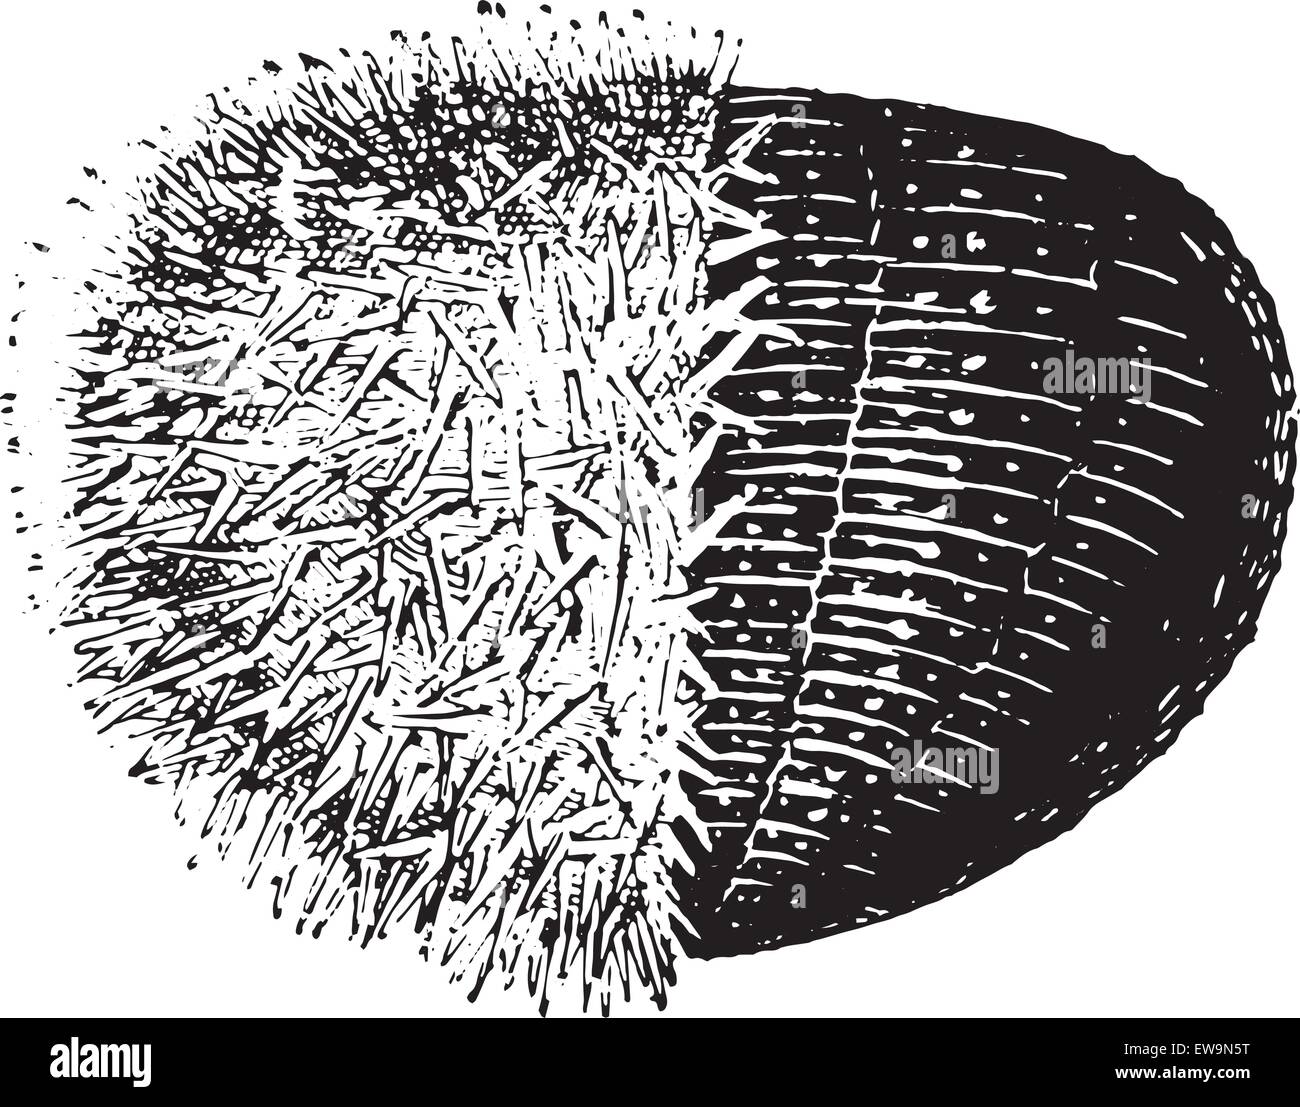 Urchin or Sea hedgehogs or Sea urchins, vintage engraved illustration. Dictionary of words and things - Larive and Fleury - 1895. Stock Vector